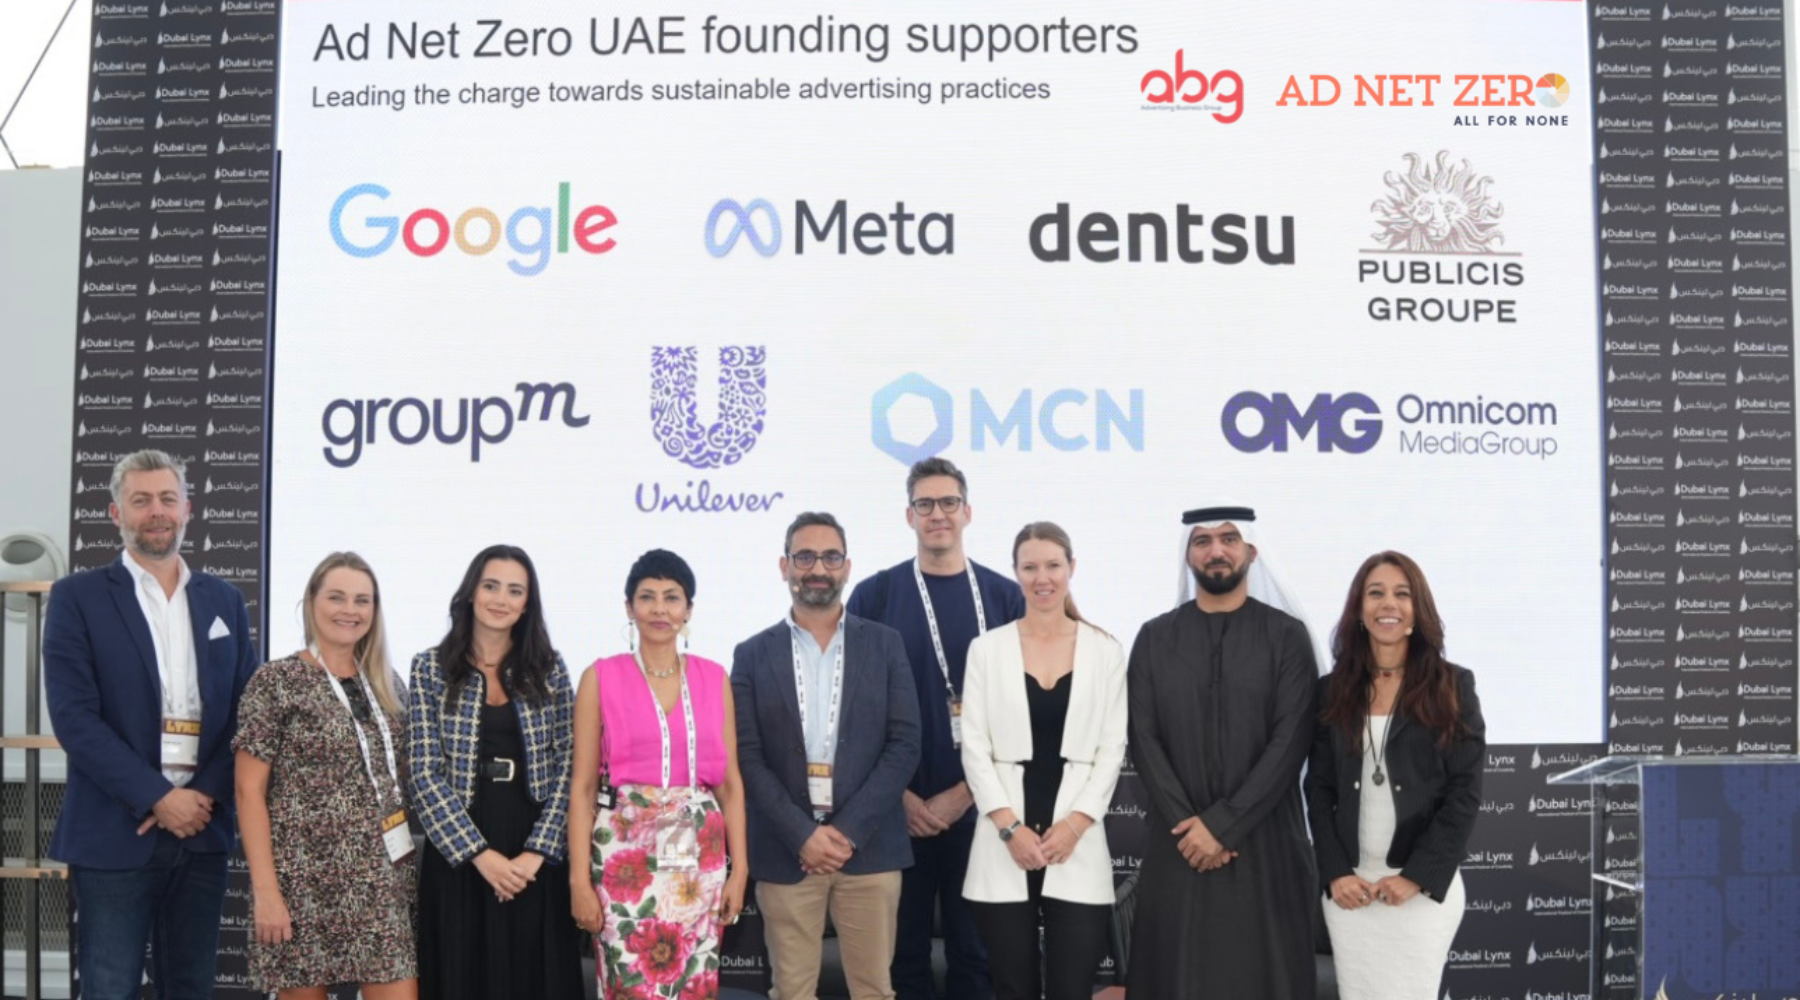 ABG Partners with Ad Net Zero to Reduce Emissions from UAE’s Advertising Sector